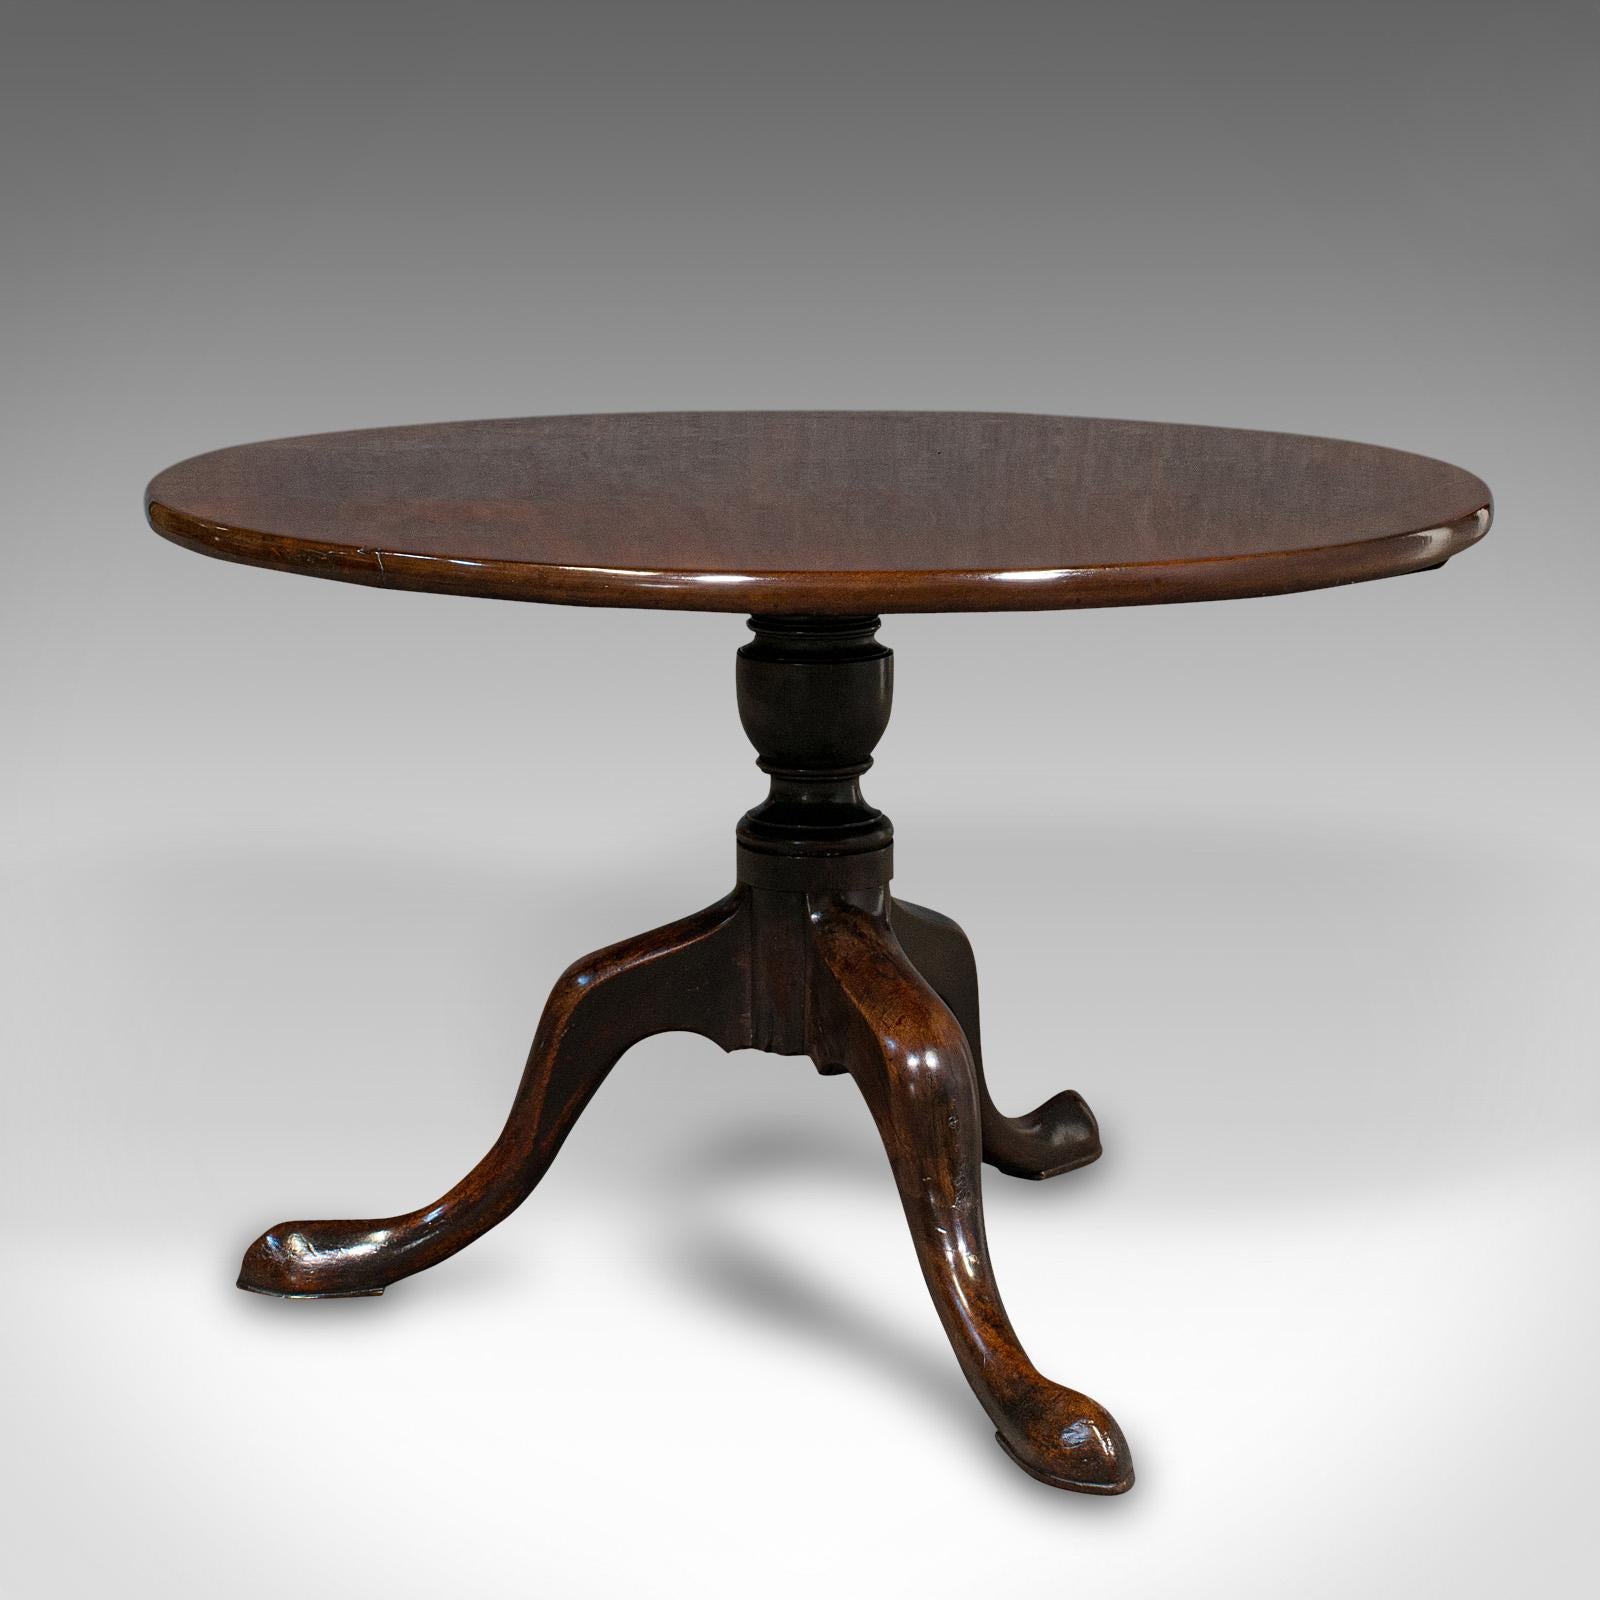 British Antique Tilt Top Table, English, Wine, Afternoon Tea, Early Georgian, Circa 1750 For Sale